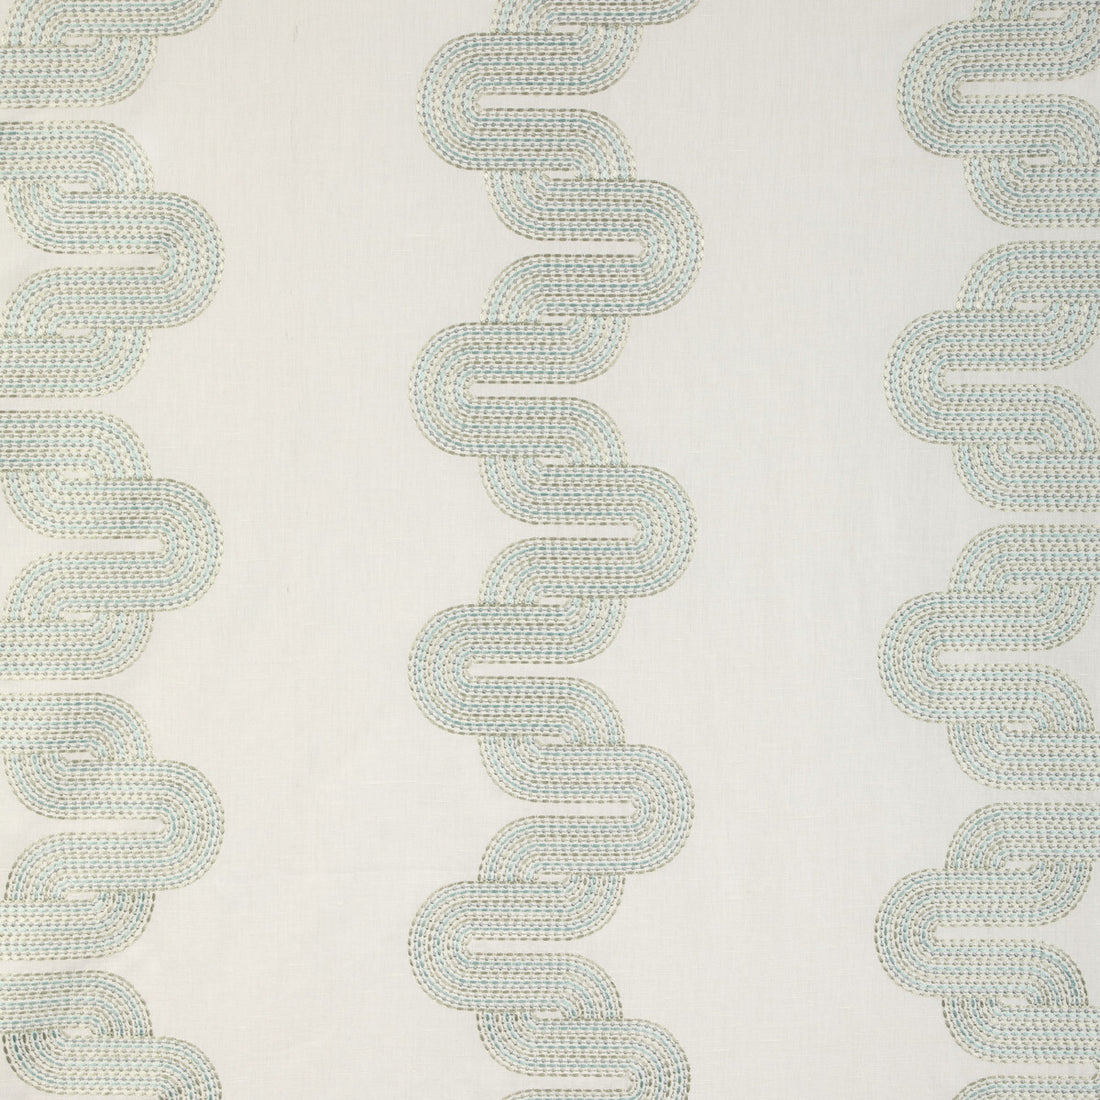 Cloud Chain fabric in grotto color - pattern 36943.13.0 - by Kravet Design in the Alexa Hampton collection